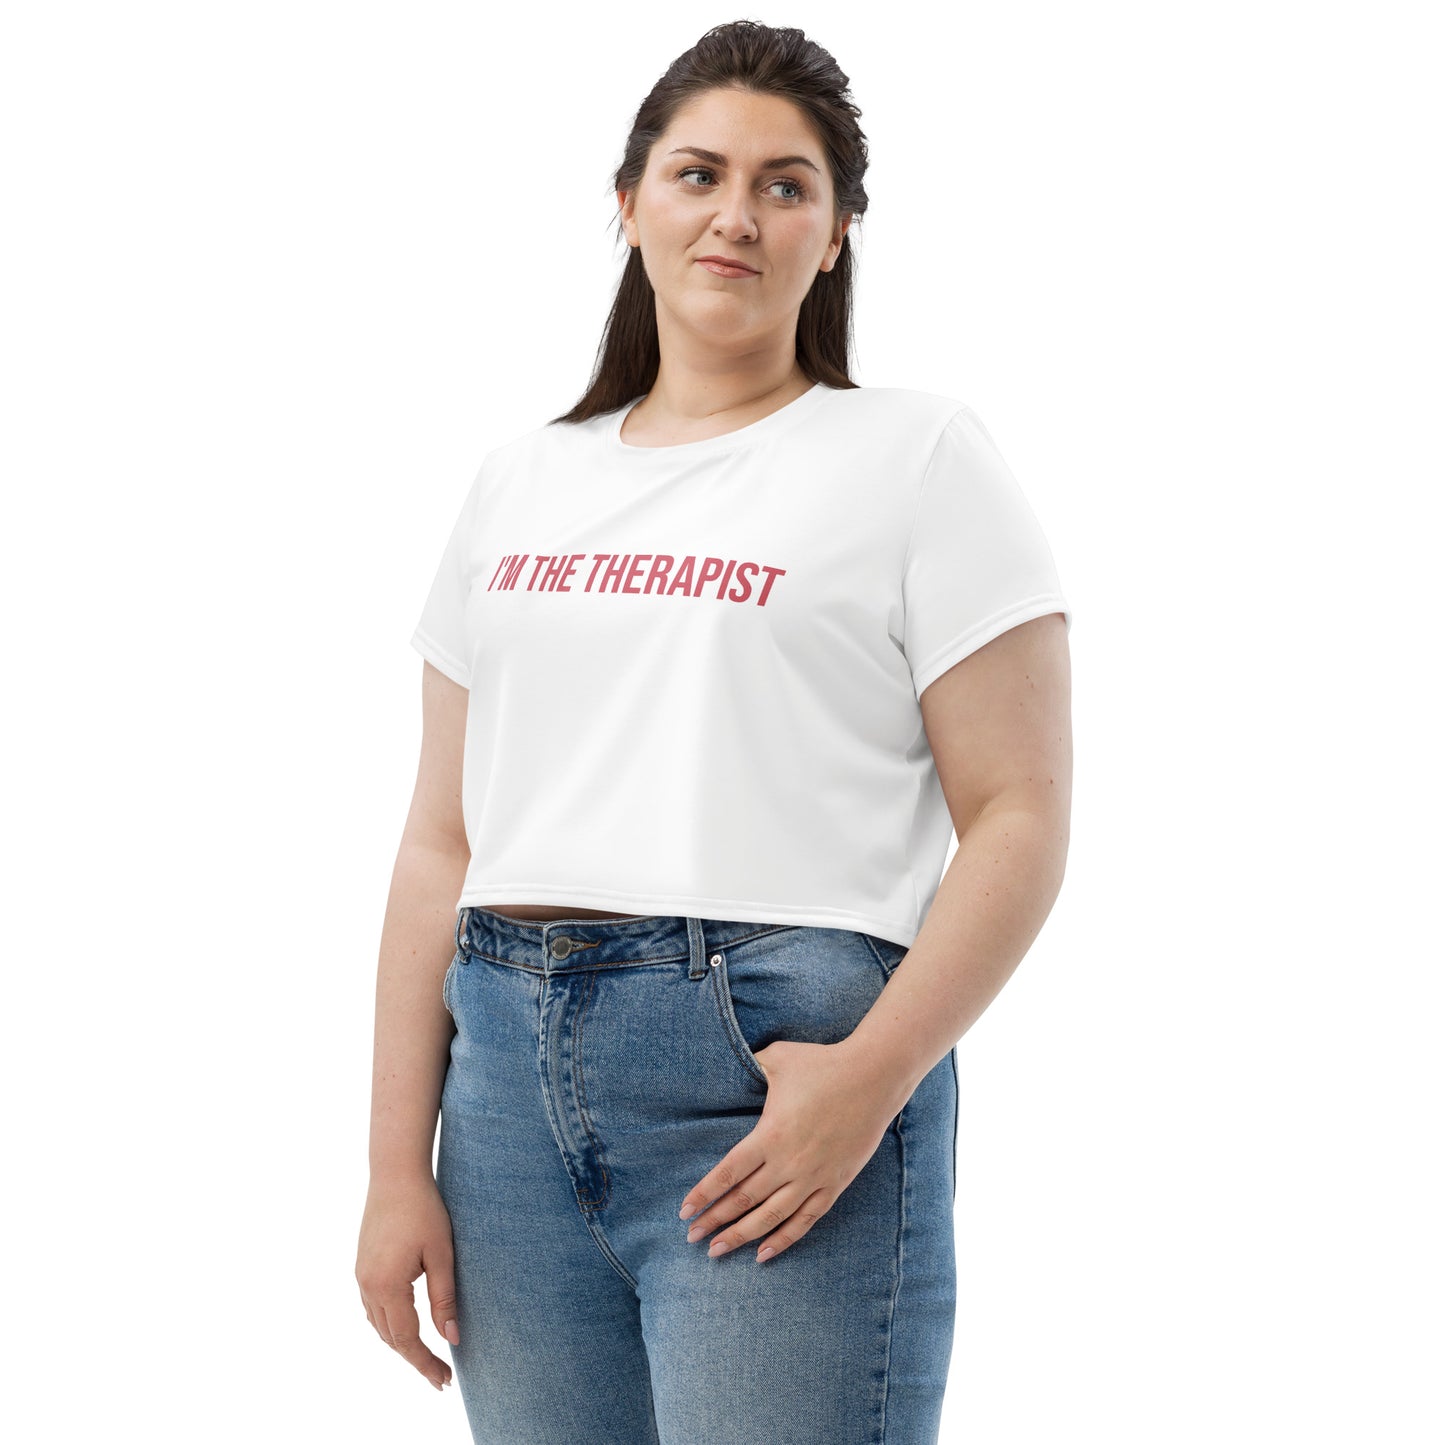 I'm the Therapist | Crop Top